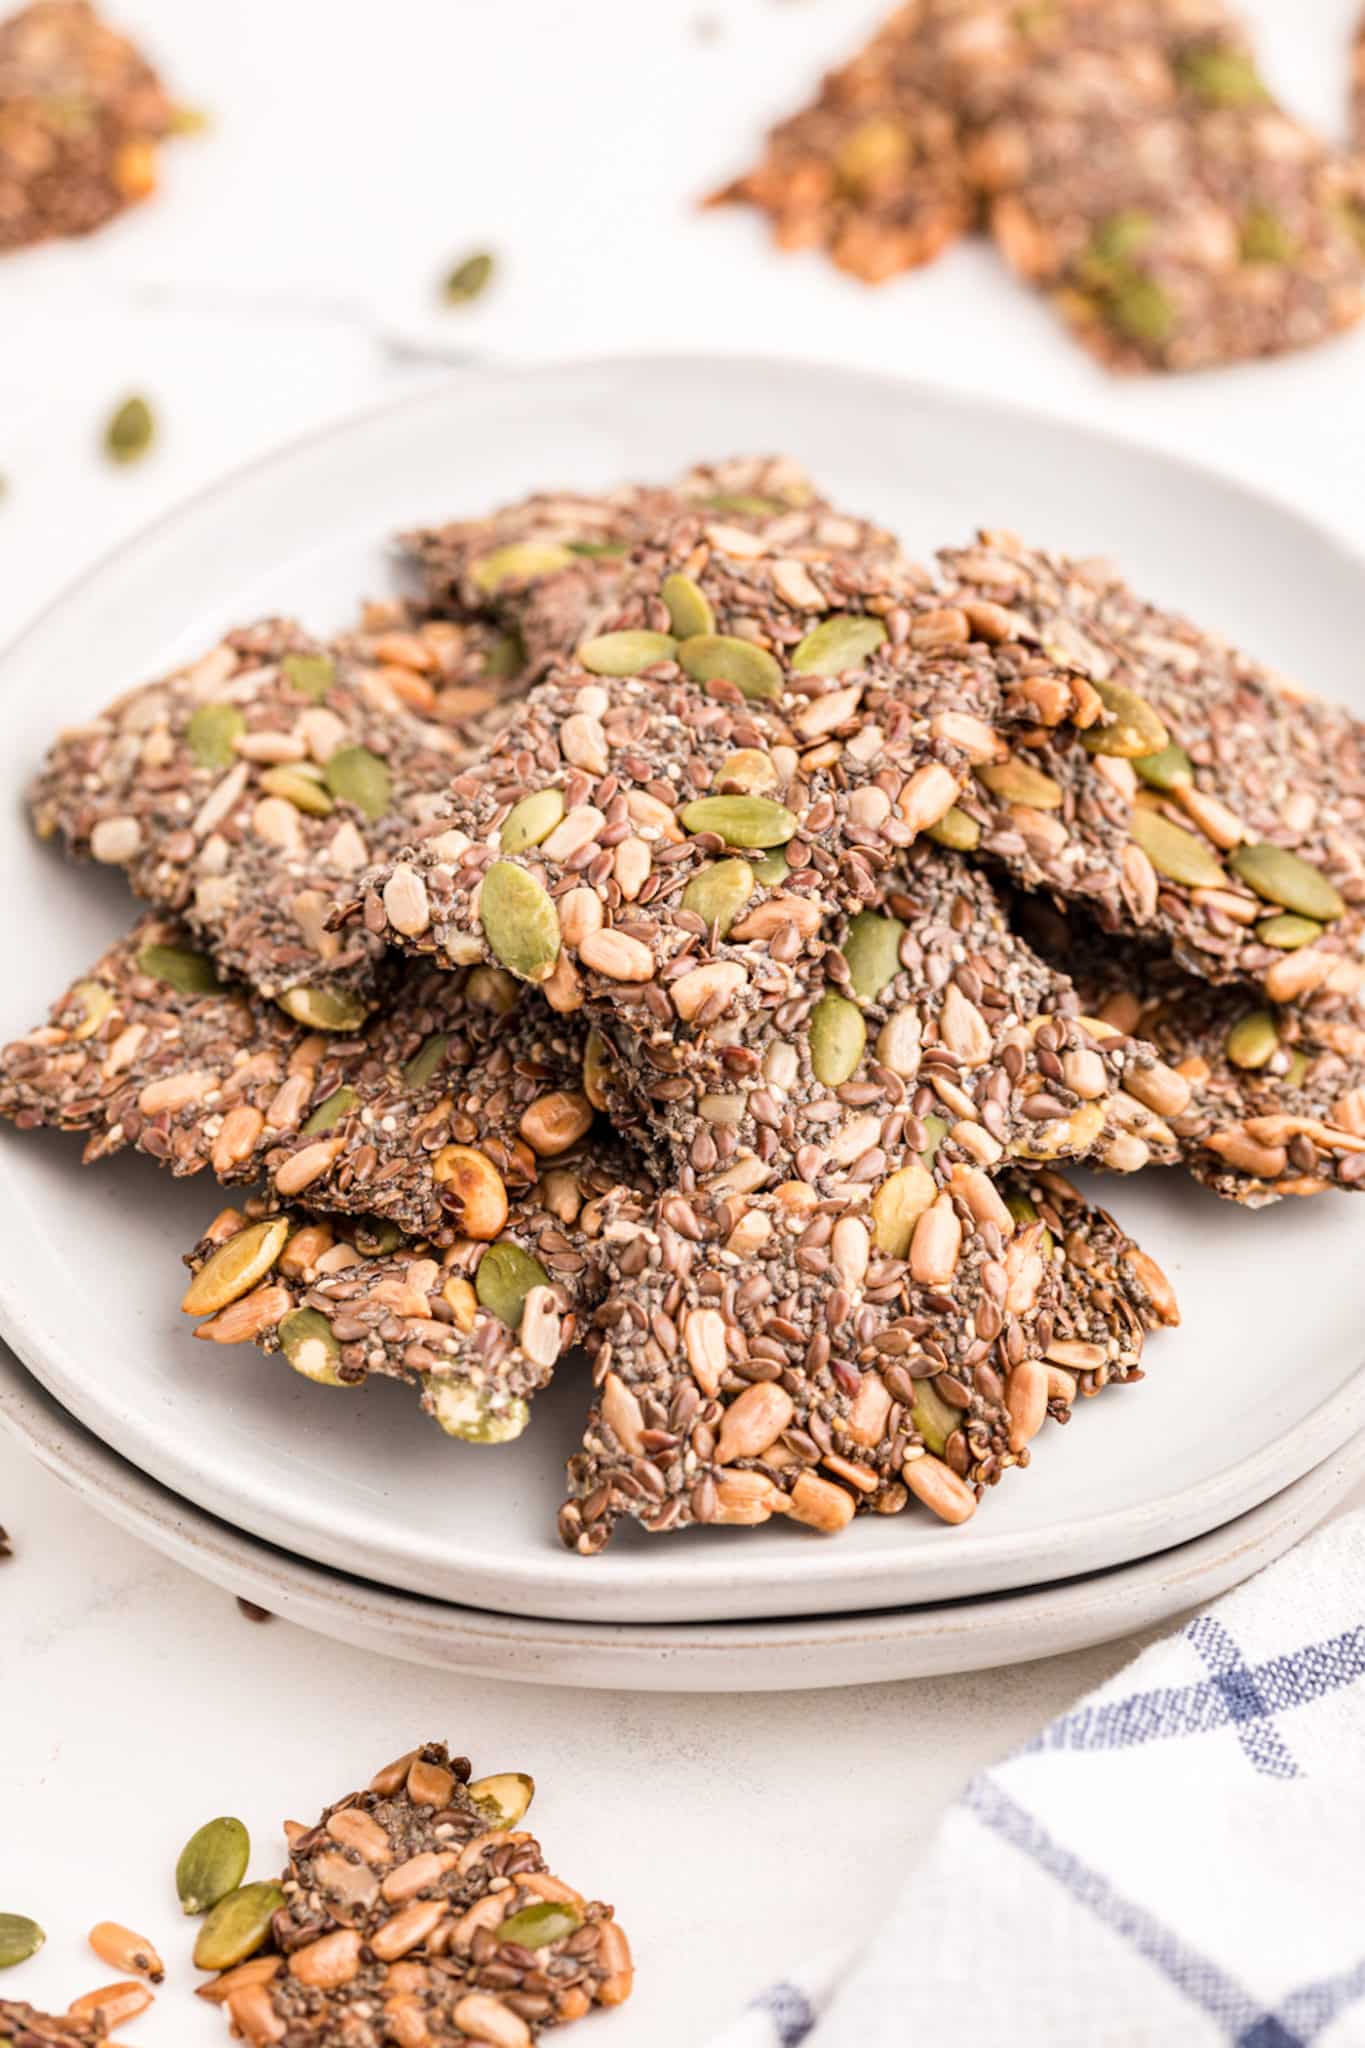 A pile of homemade seed crackers on a white plate.